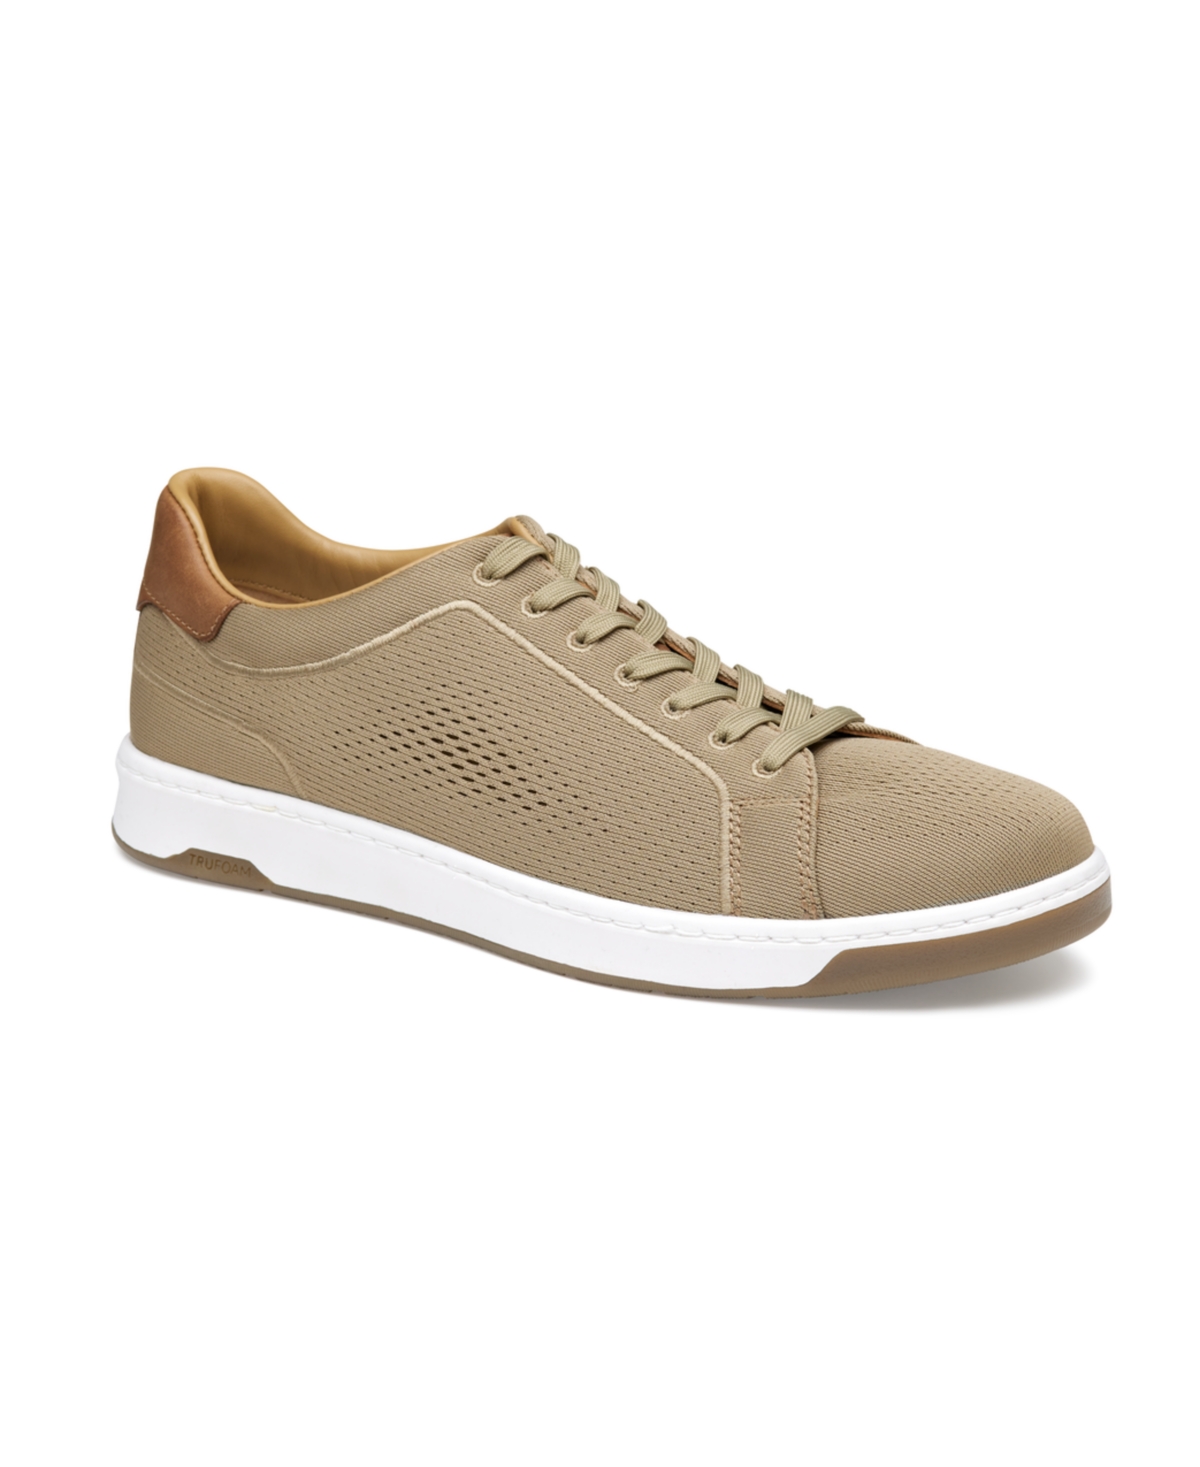 Men's Daxton Knit Lace-Up Sneakers - Taupe